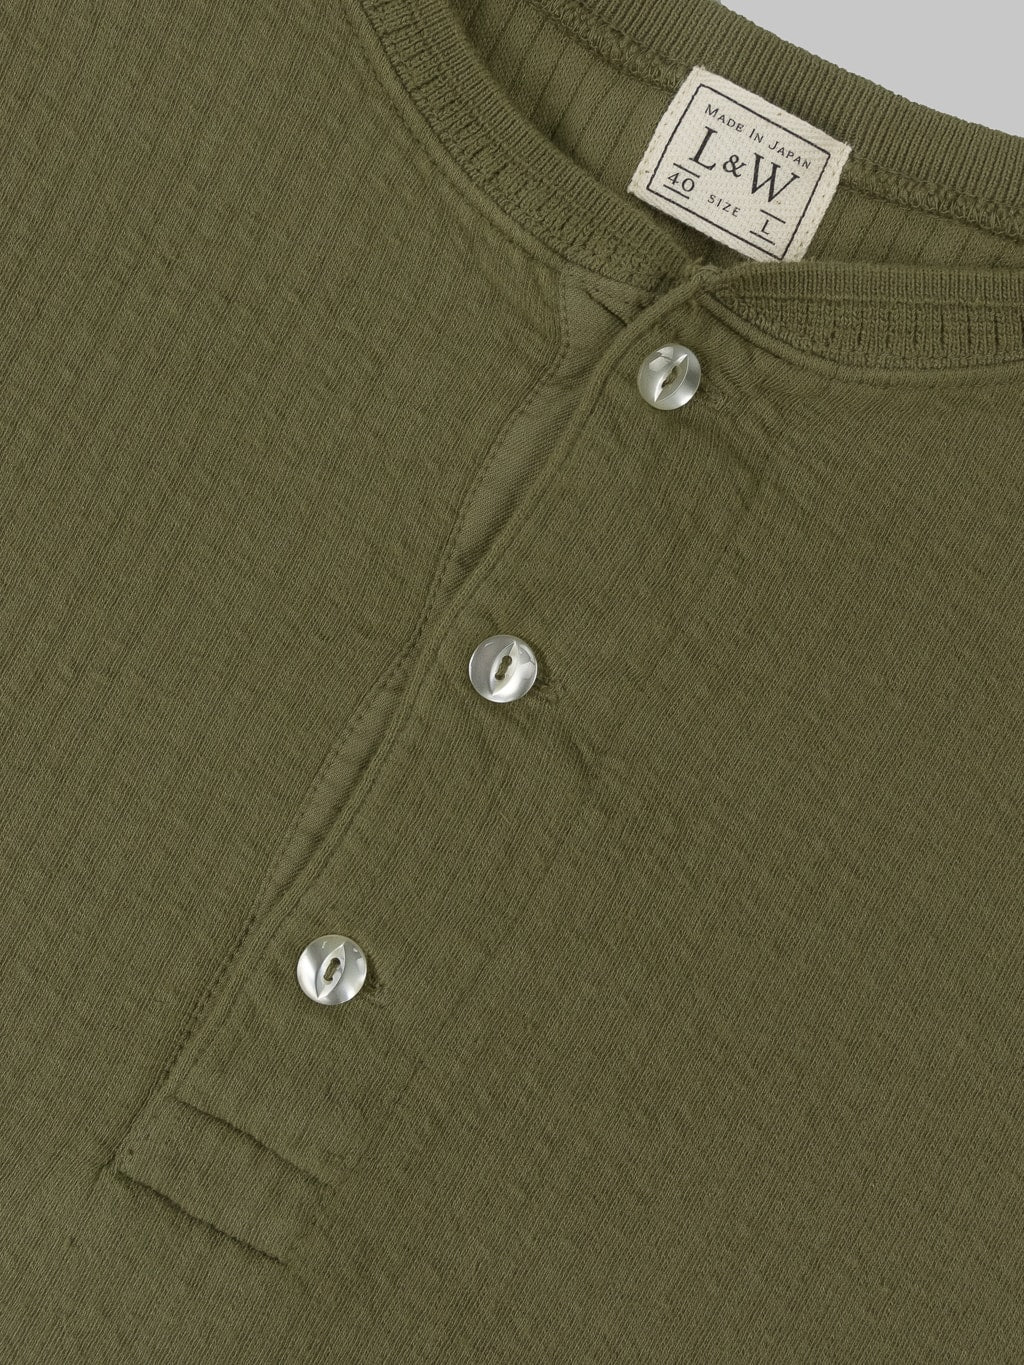 Loop Weft Double Face Jacquard henley Thermal army olive buttons